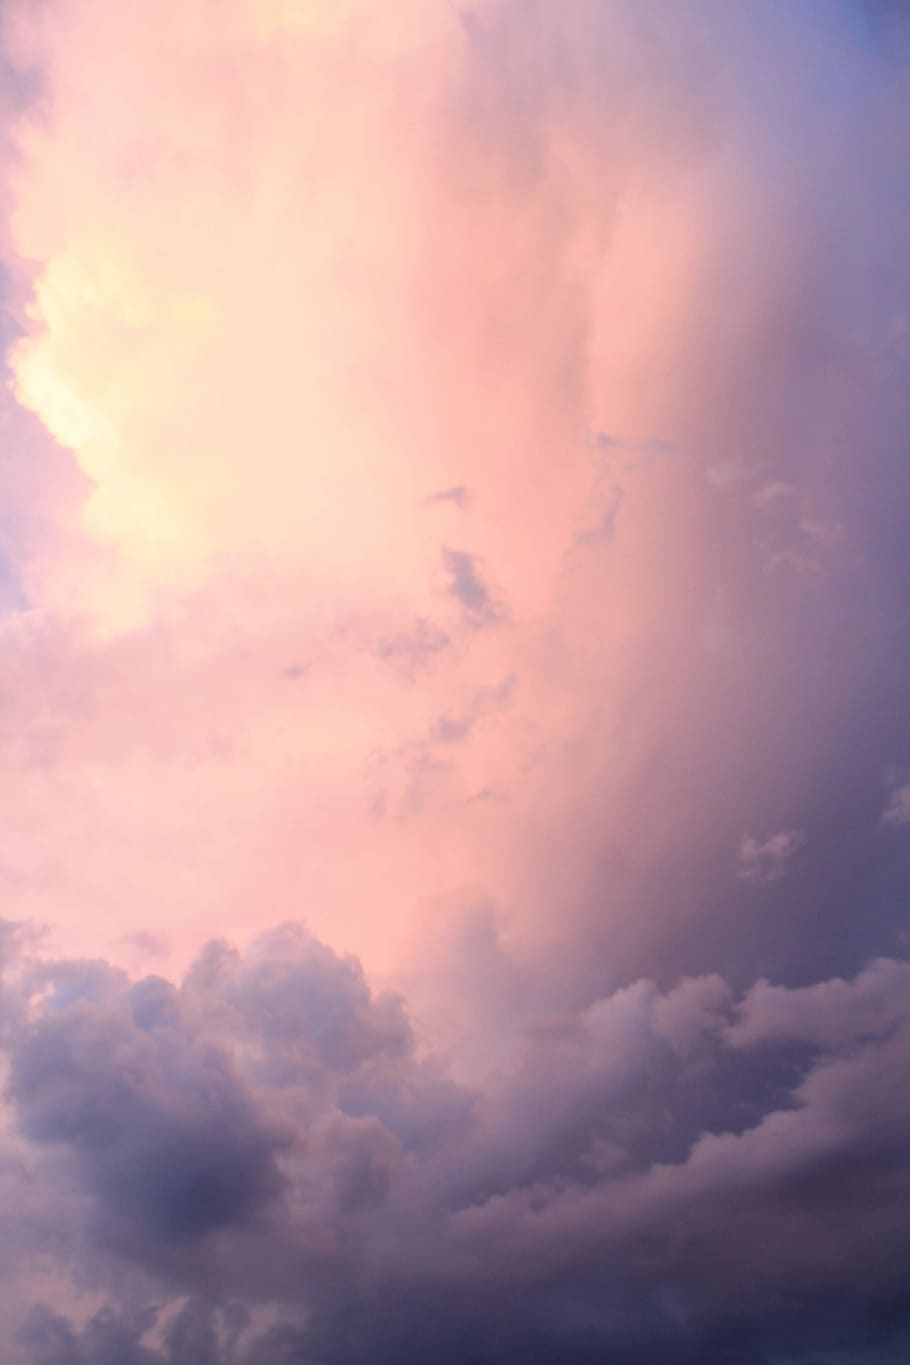 White Clouds During Daytime, Gray And Pink Clouds, - Cloud Wallpaper Iphone Xs - HD Wallpaper 